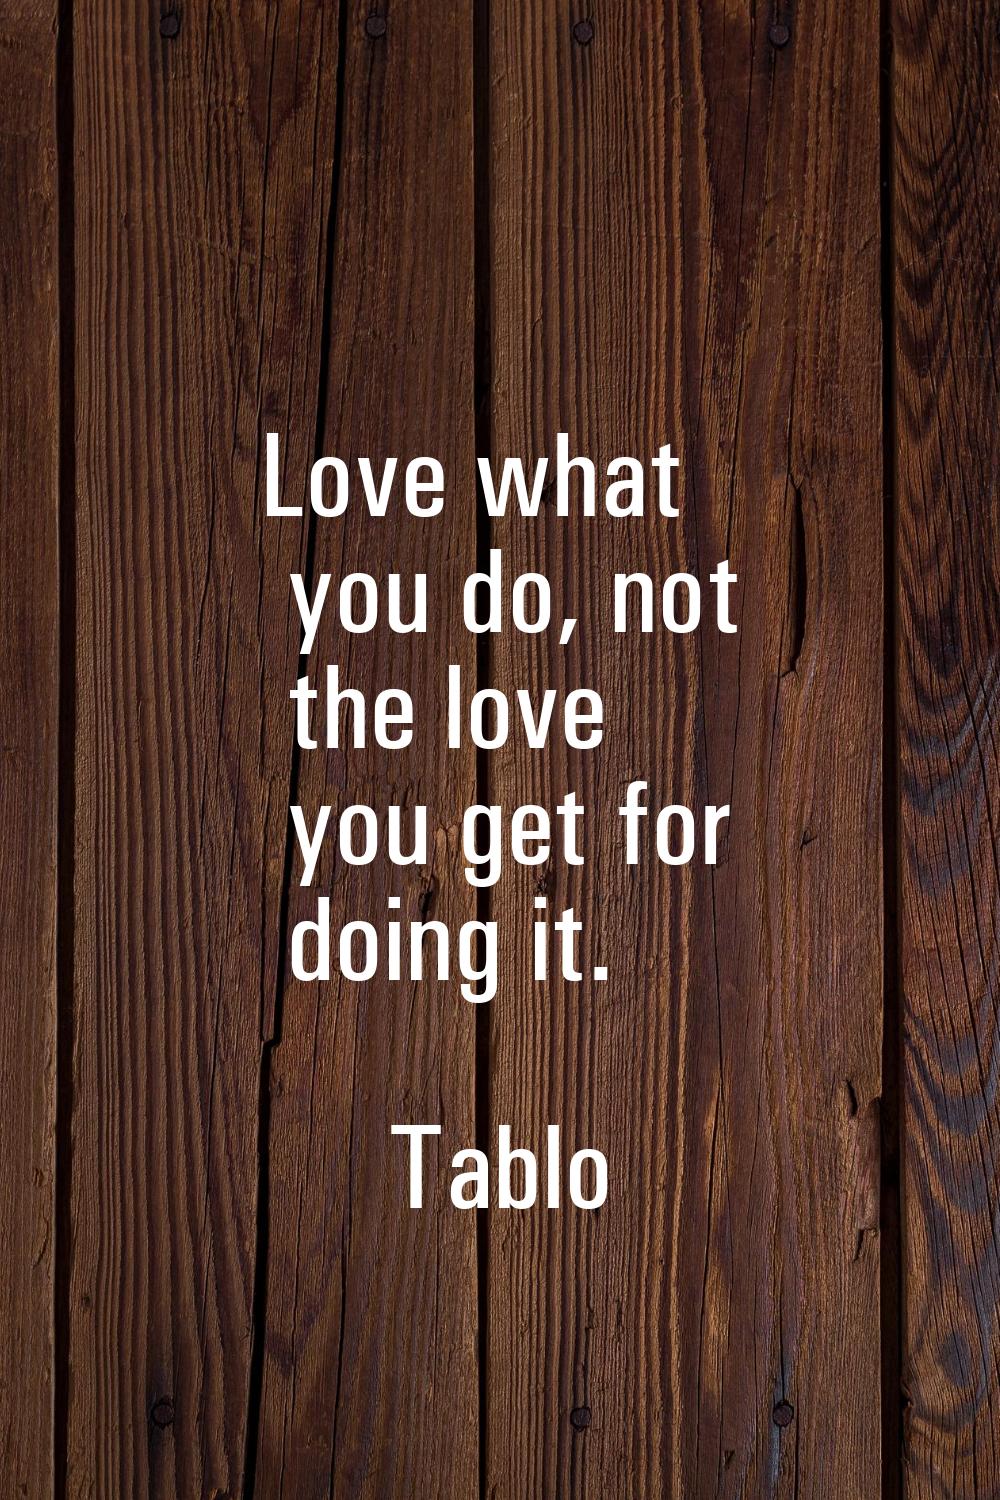 Love what you do, not the love you get for doing it.